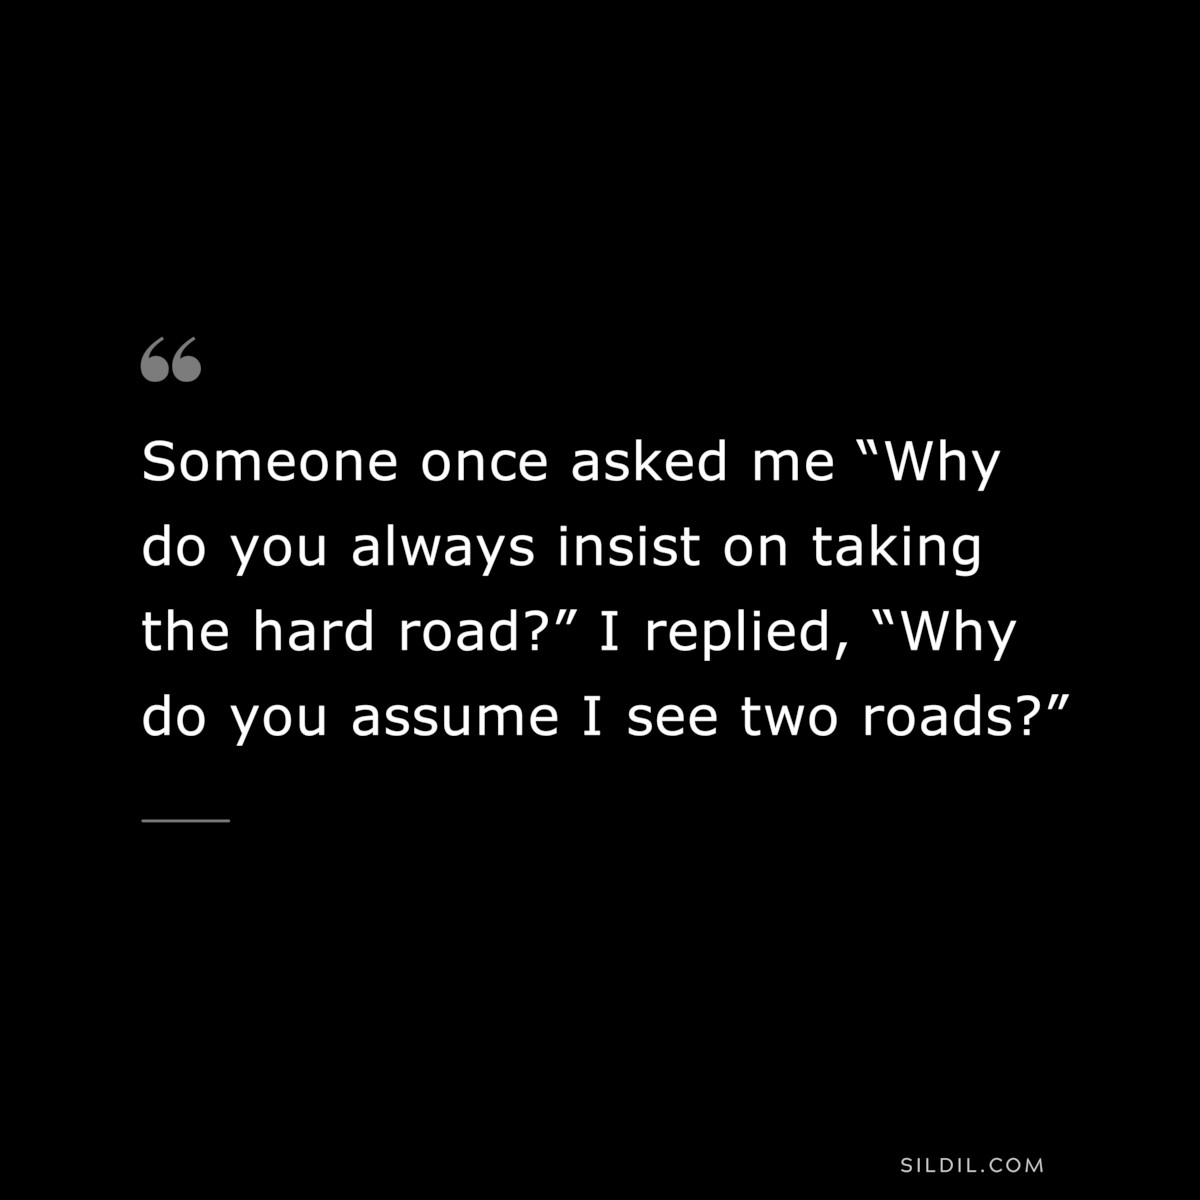 Someone once asked me “Why do you always insist on taking the hard road?” I replied, “Why do you assume I see two roads?”